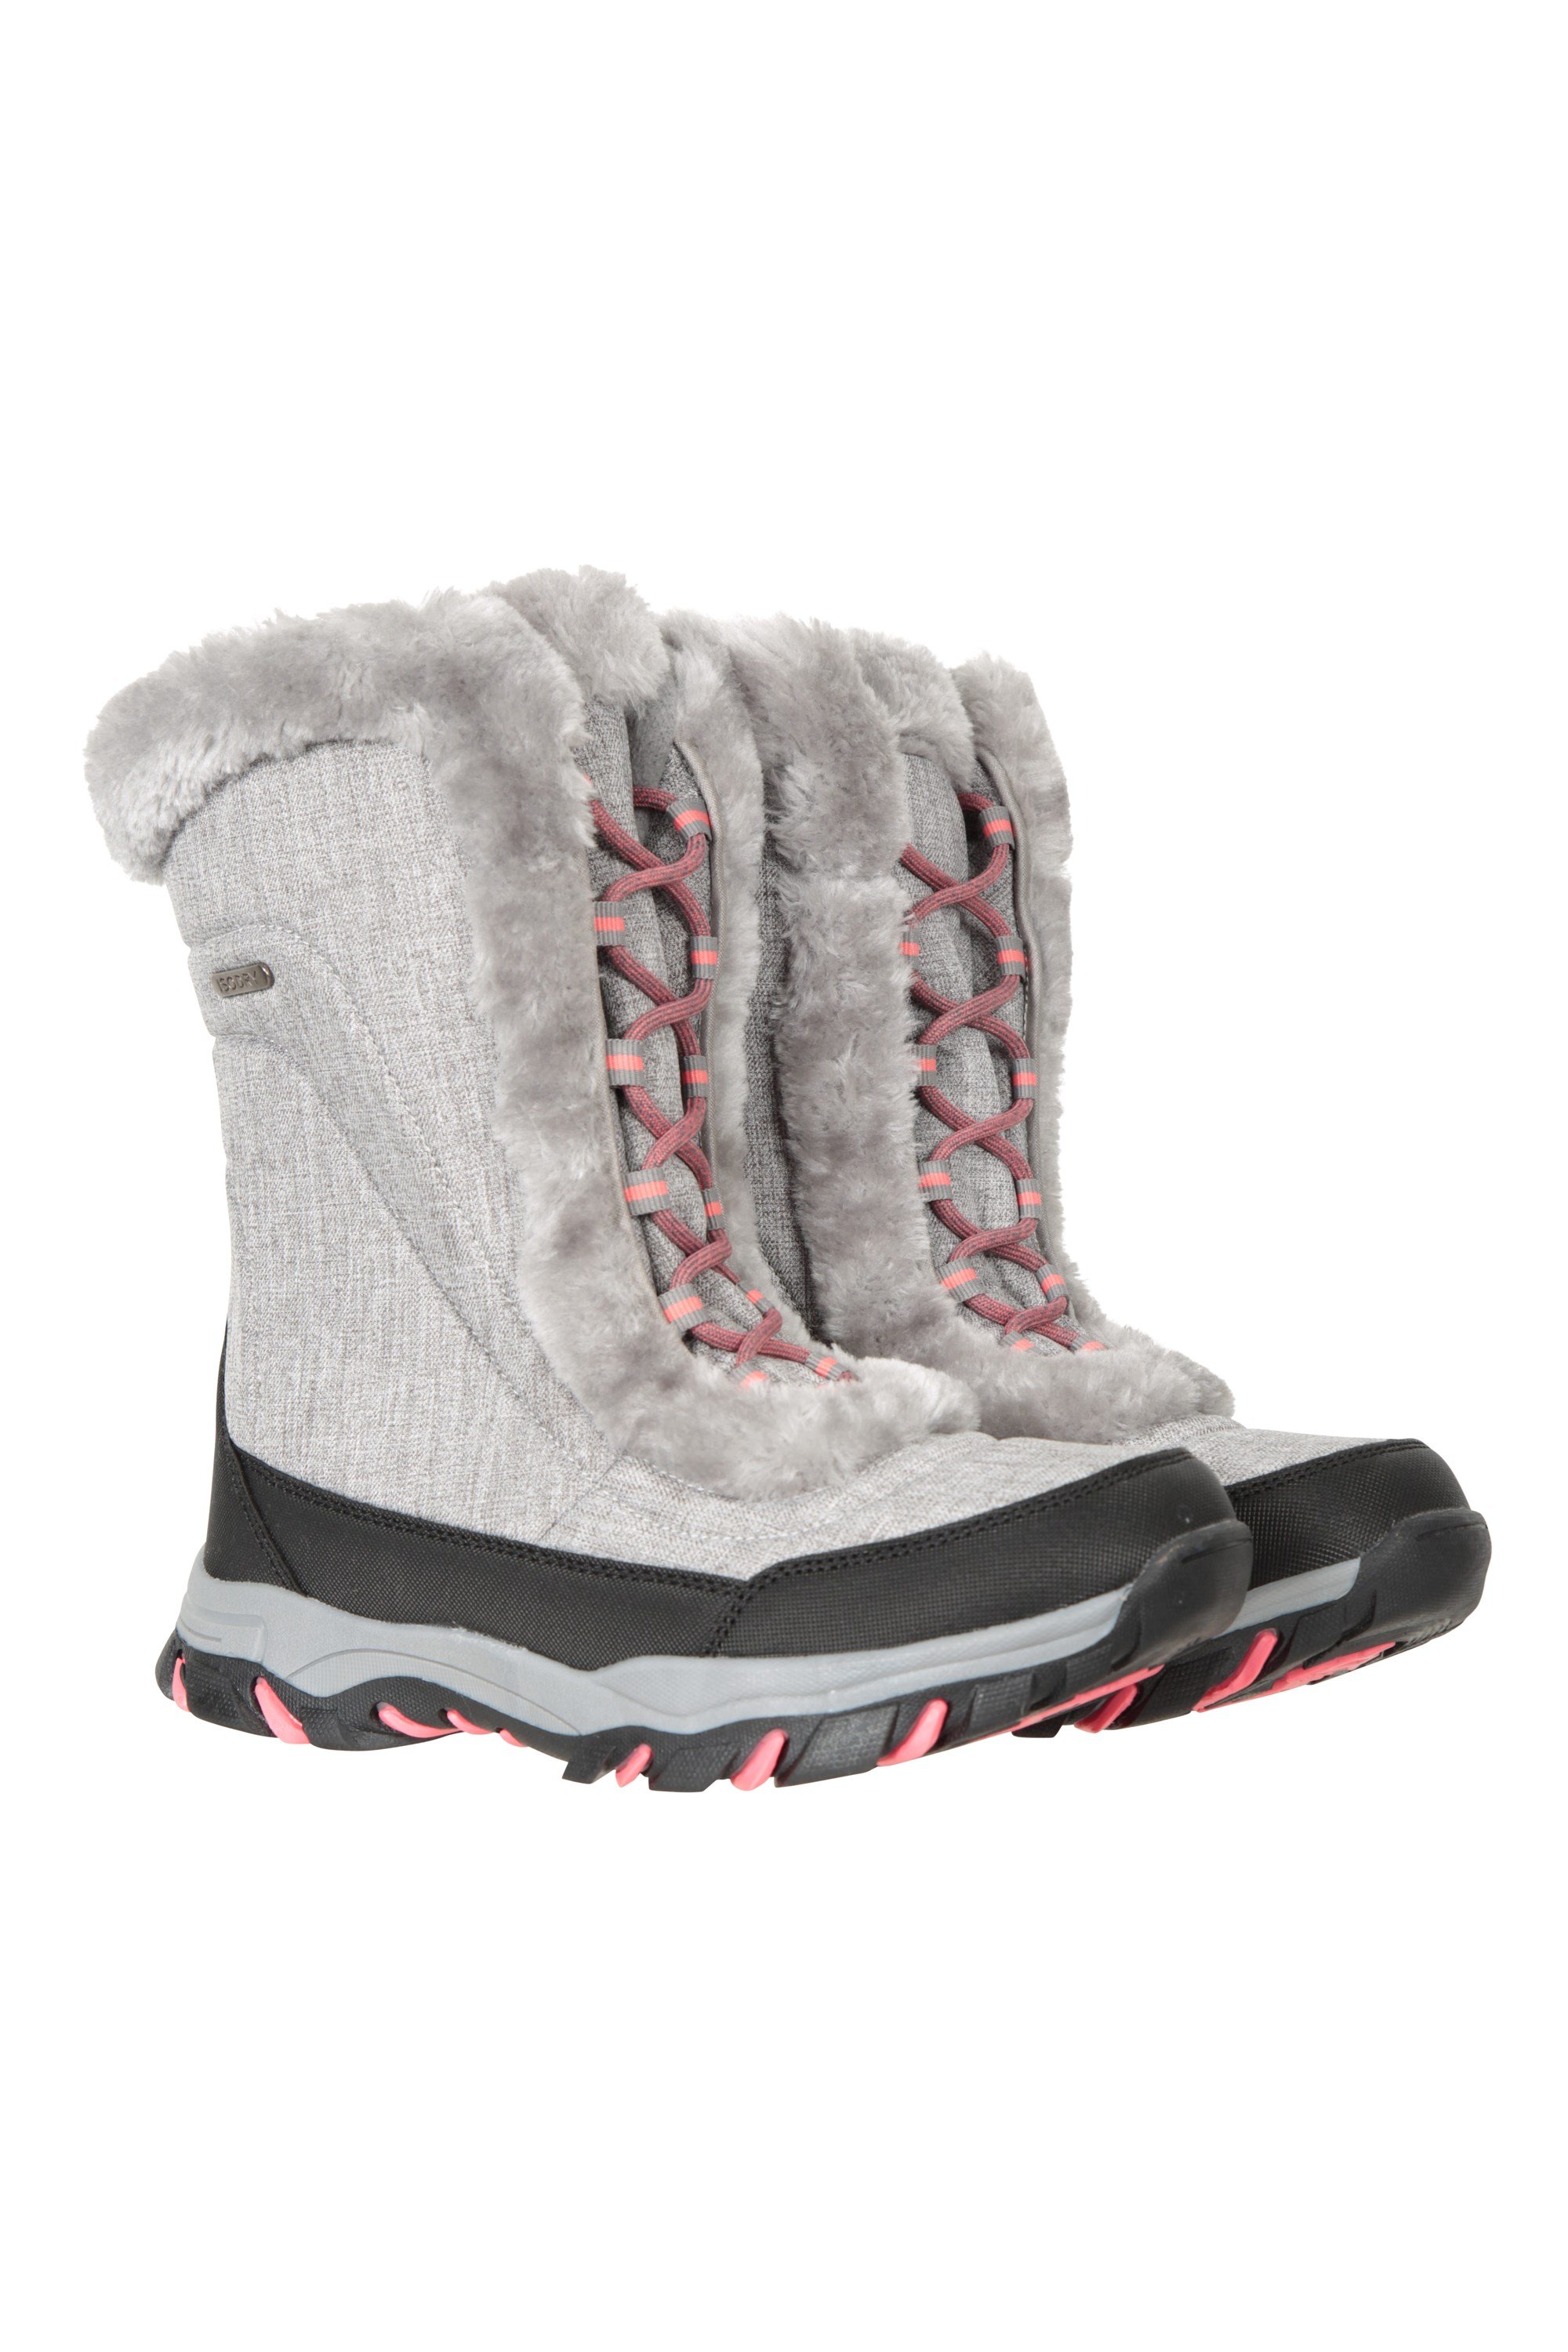 Snow Boots & Winter Boots | Mountain Warehouse US